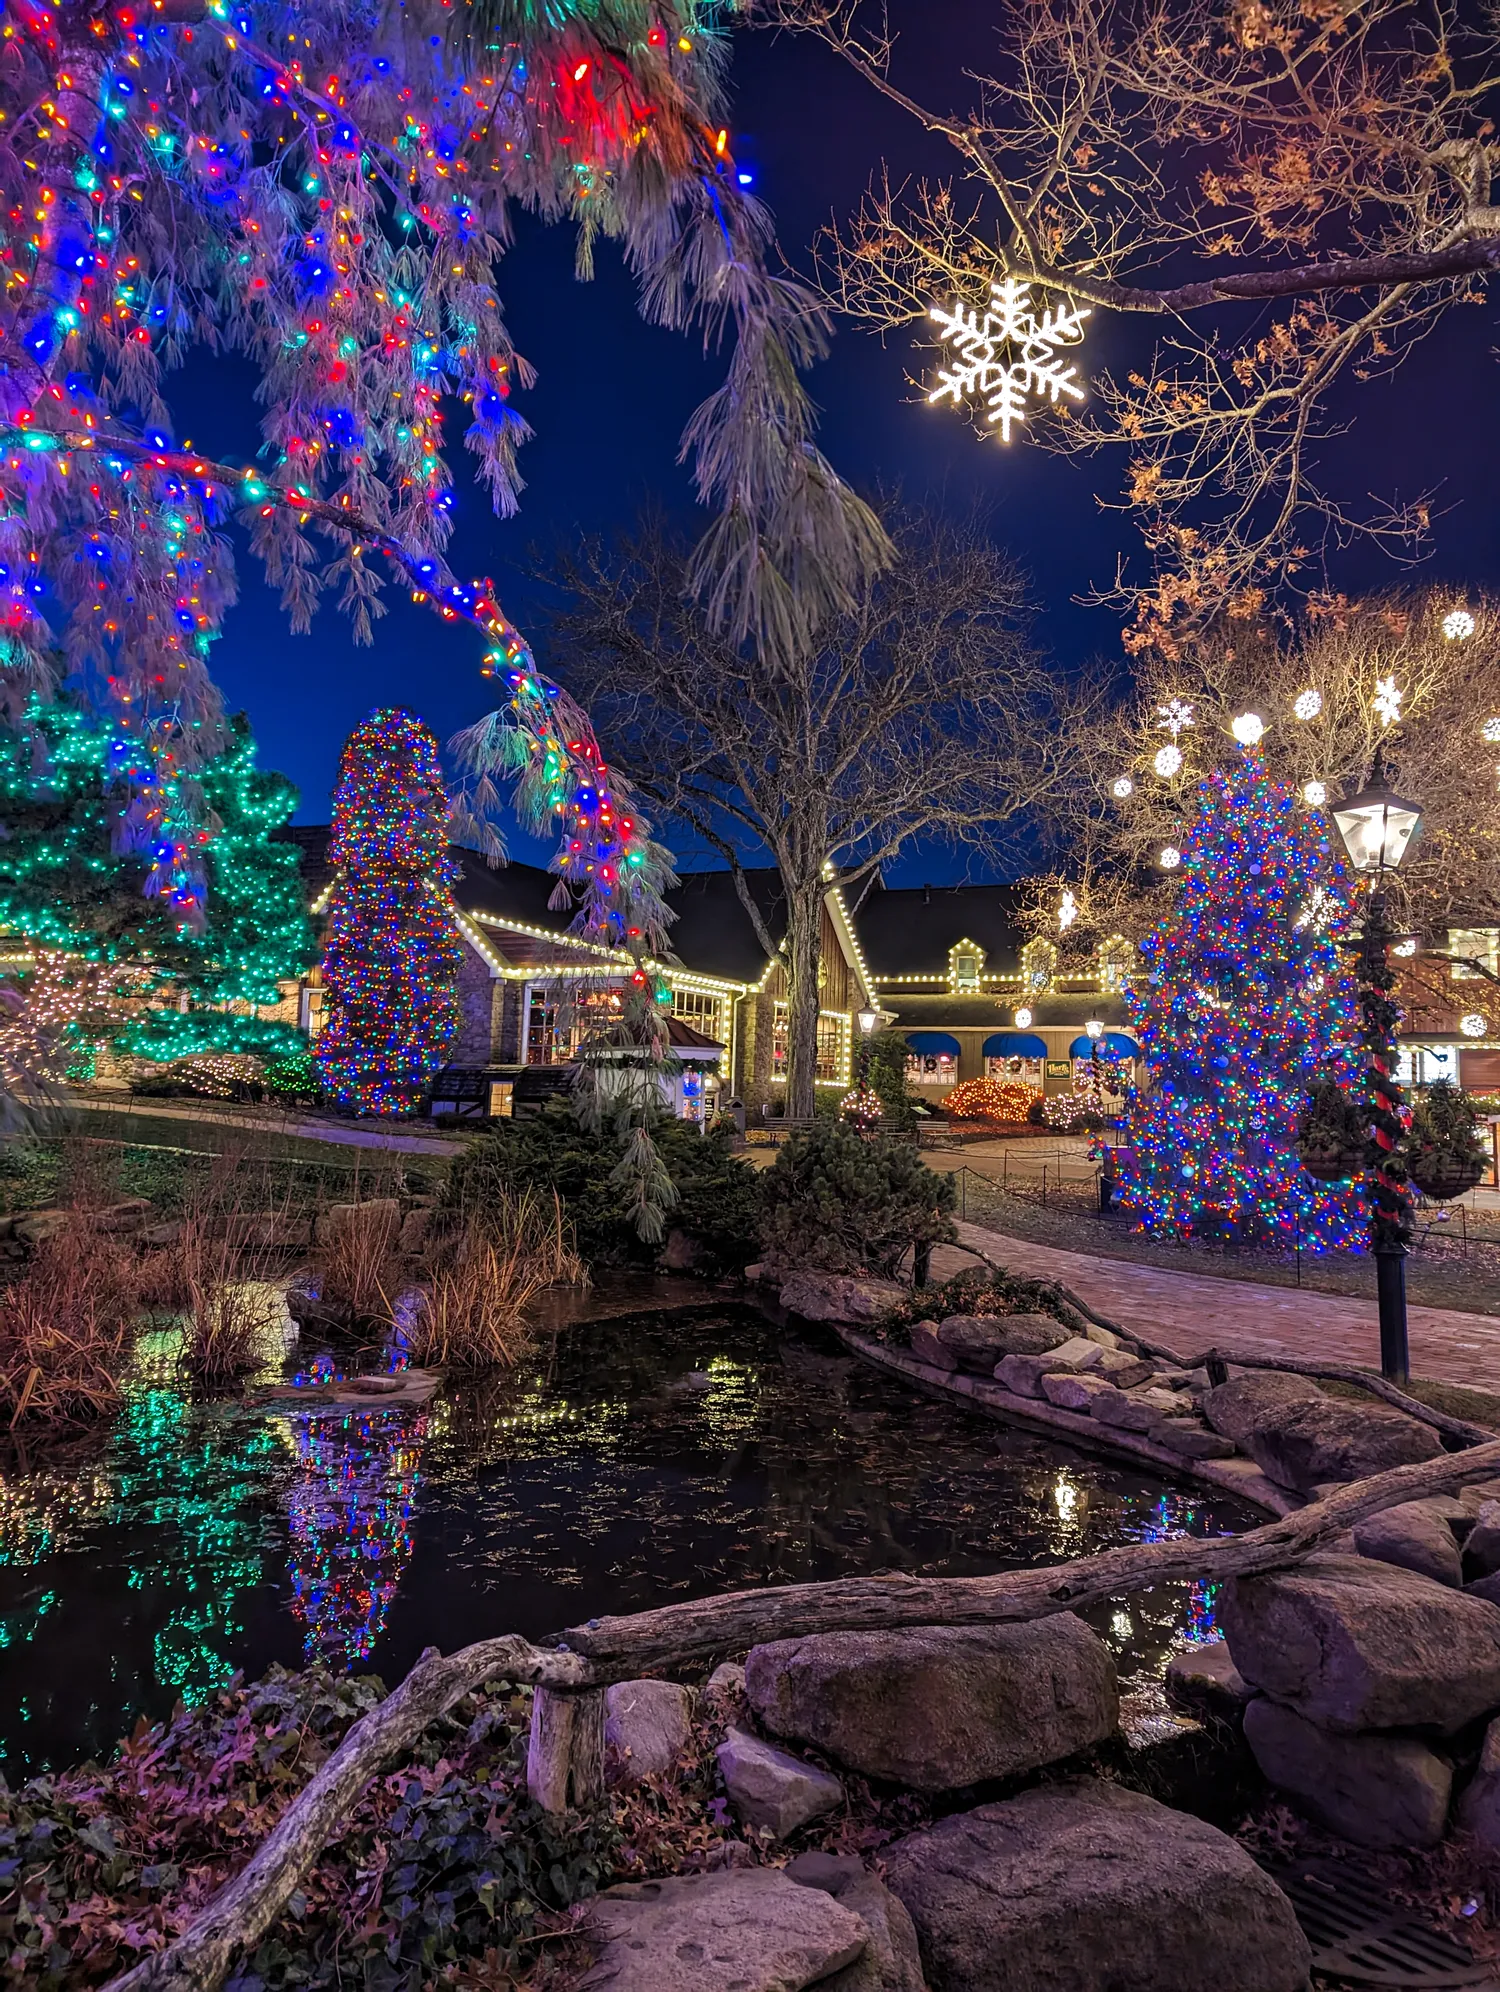 The holiday light display during dusk at Peddler's Village. Trees and buildings are glowing with lights. 